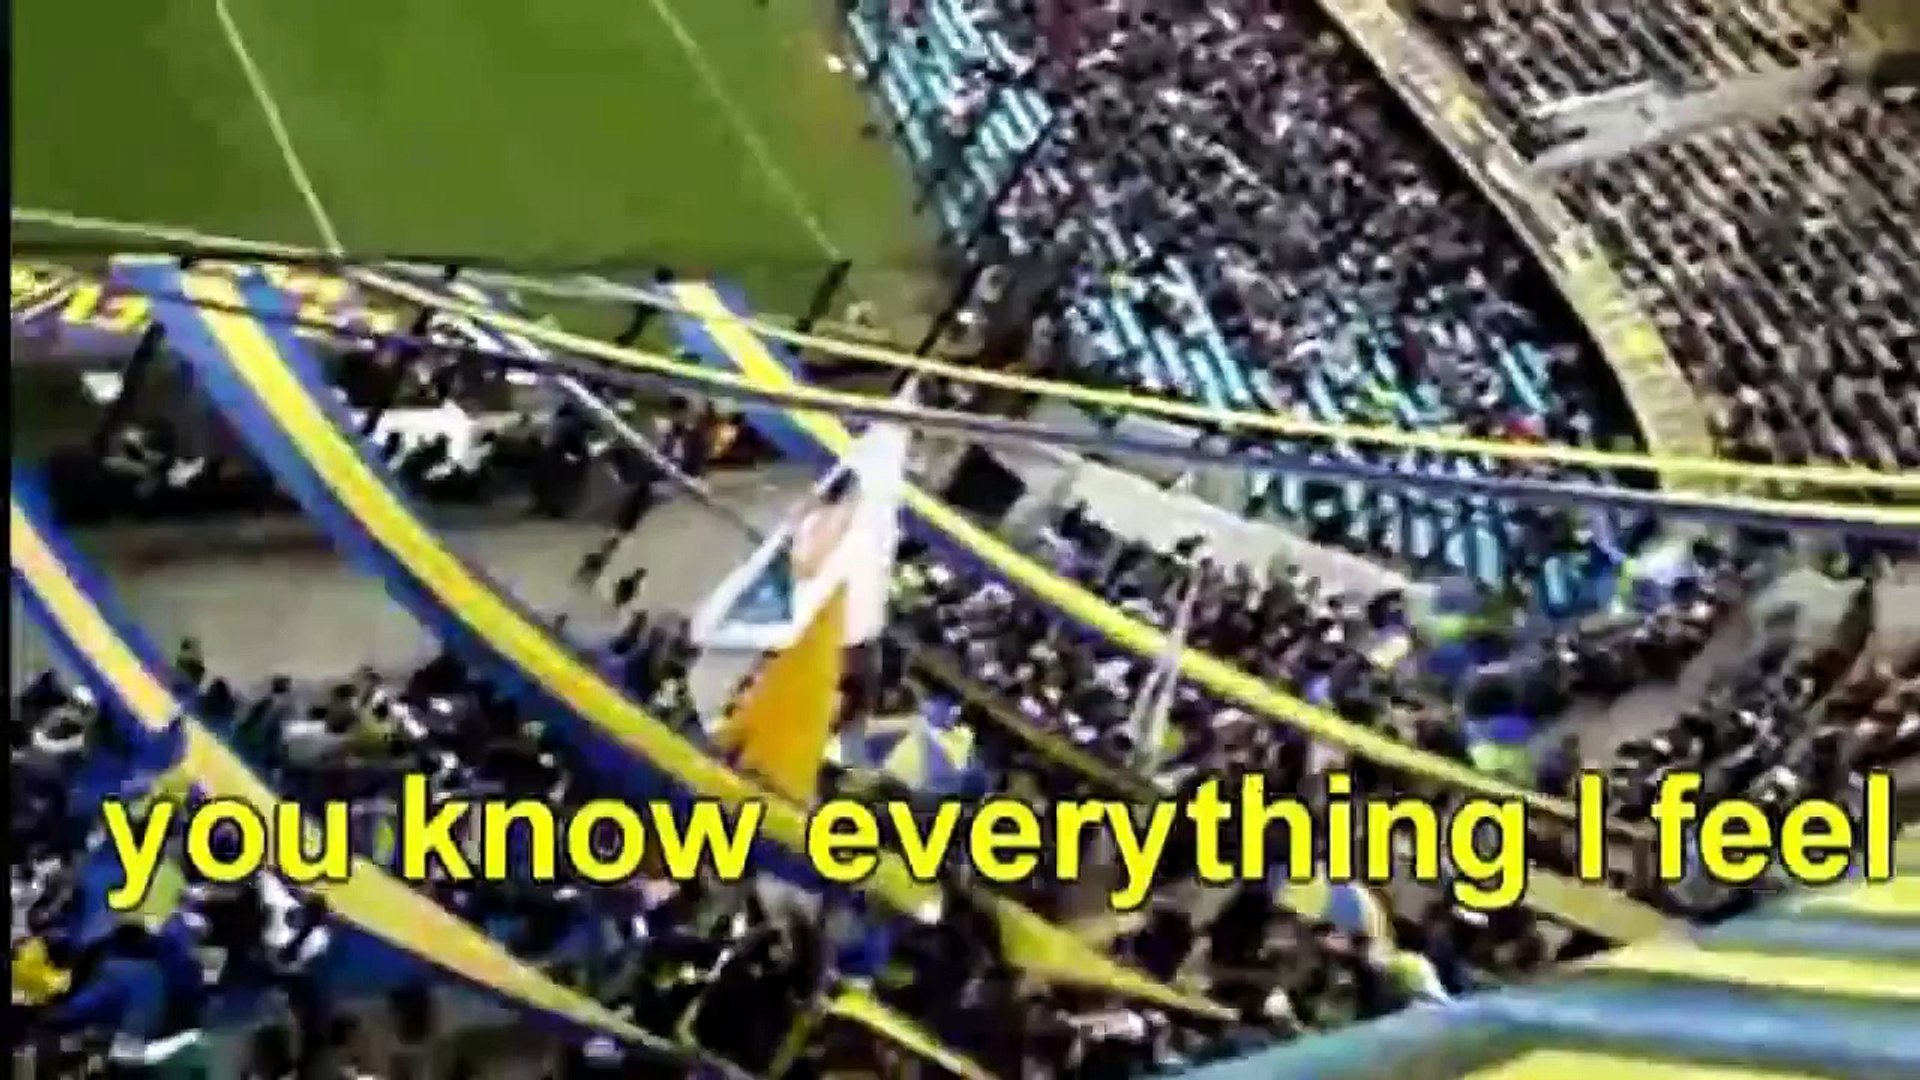 The best football songs (with lyrics in english and spanish)..Hinchadas_hooligans_ultras PART 1_6.